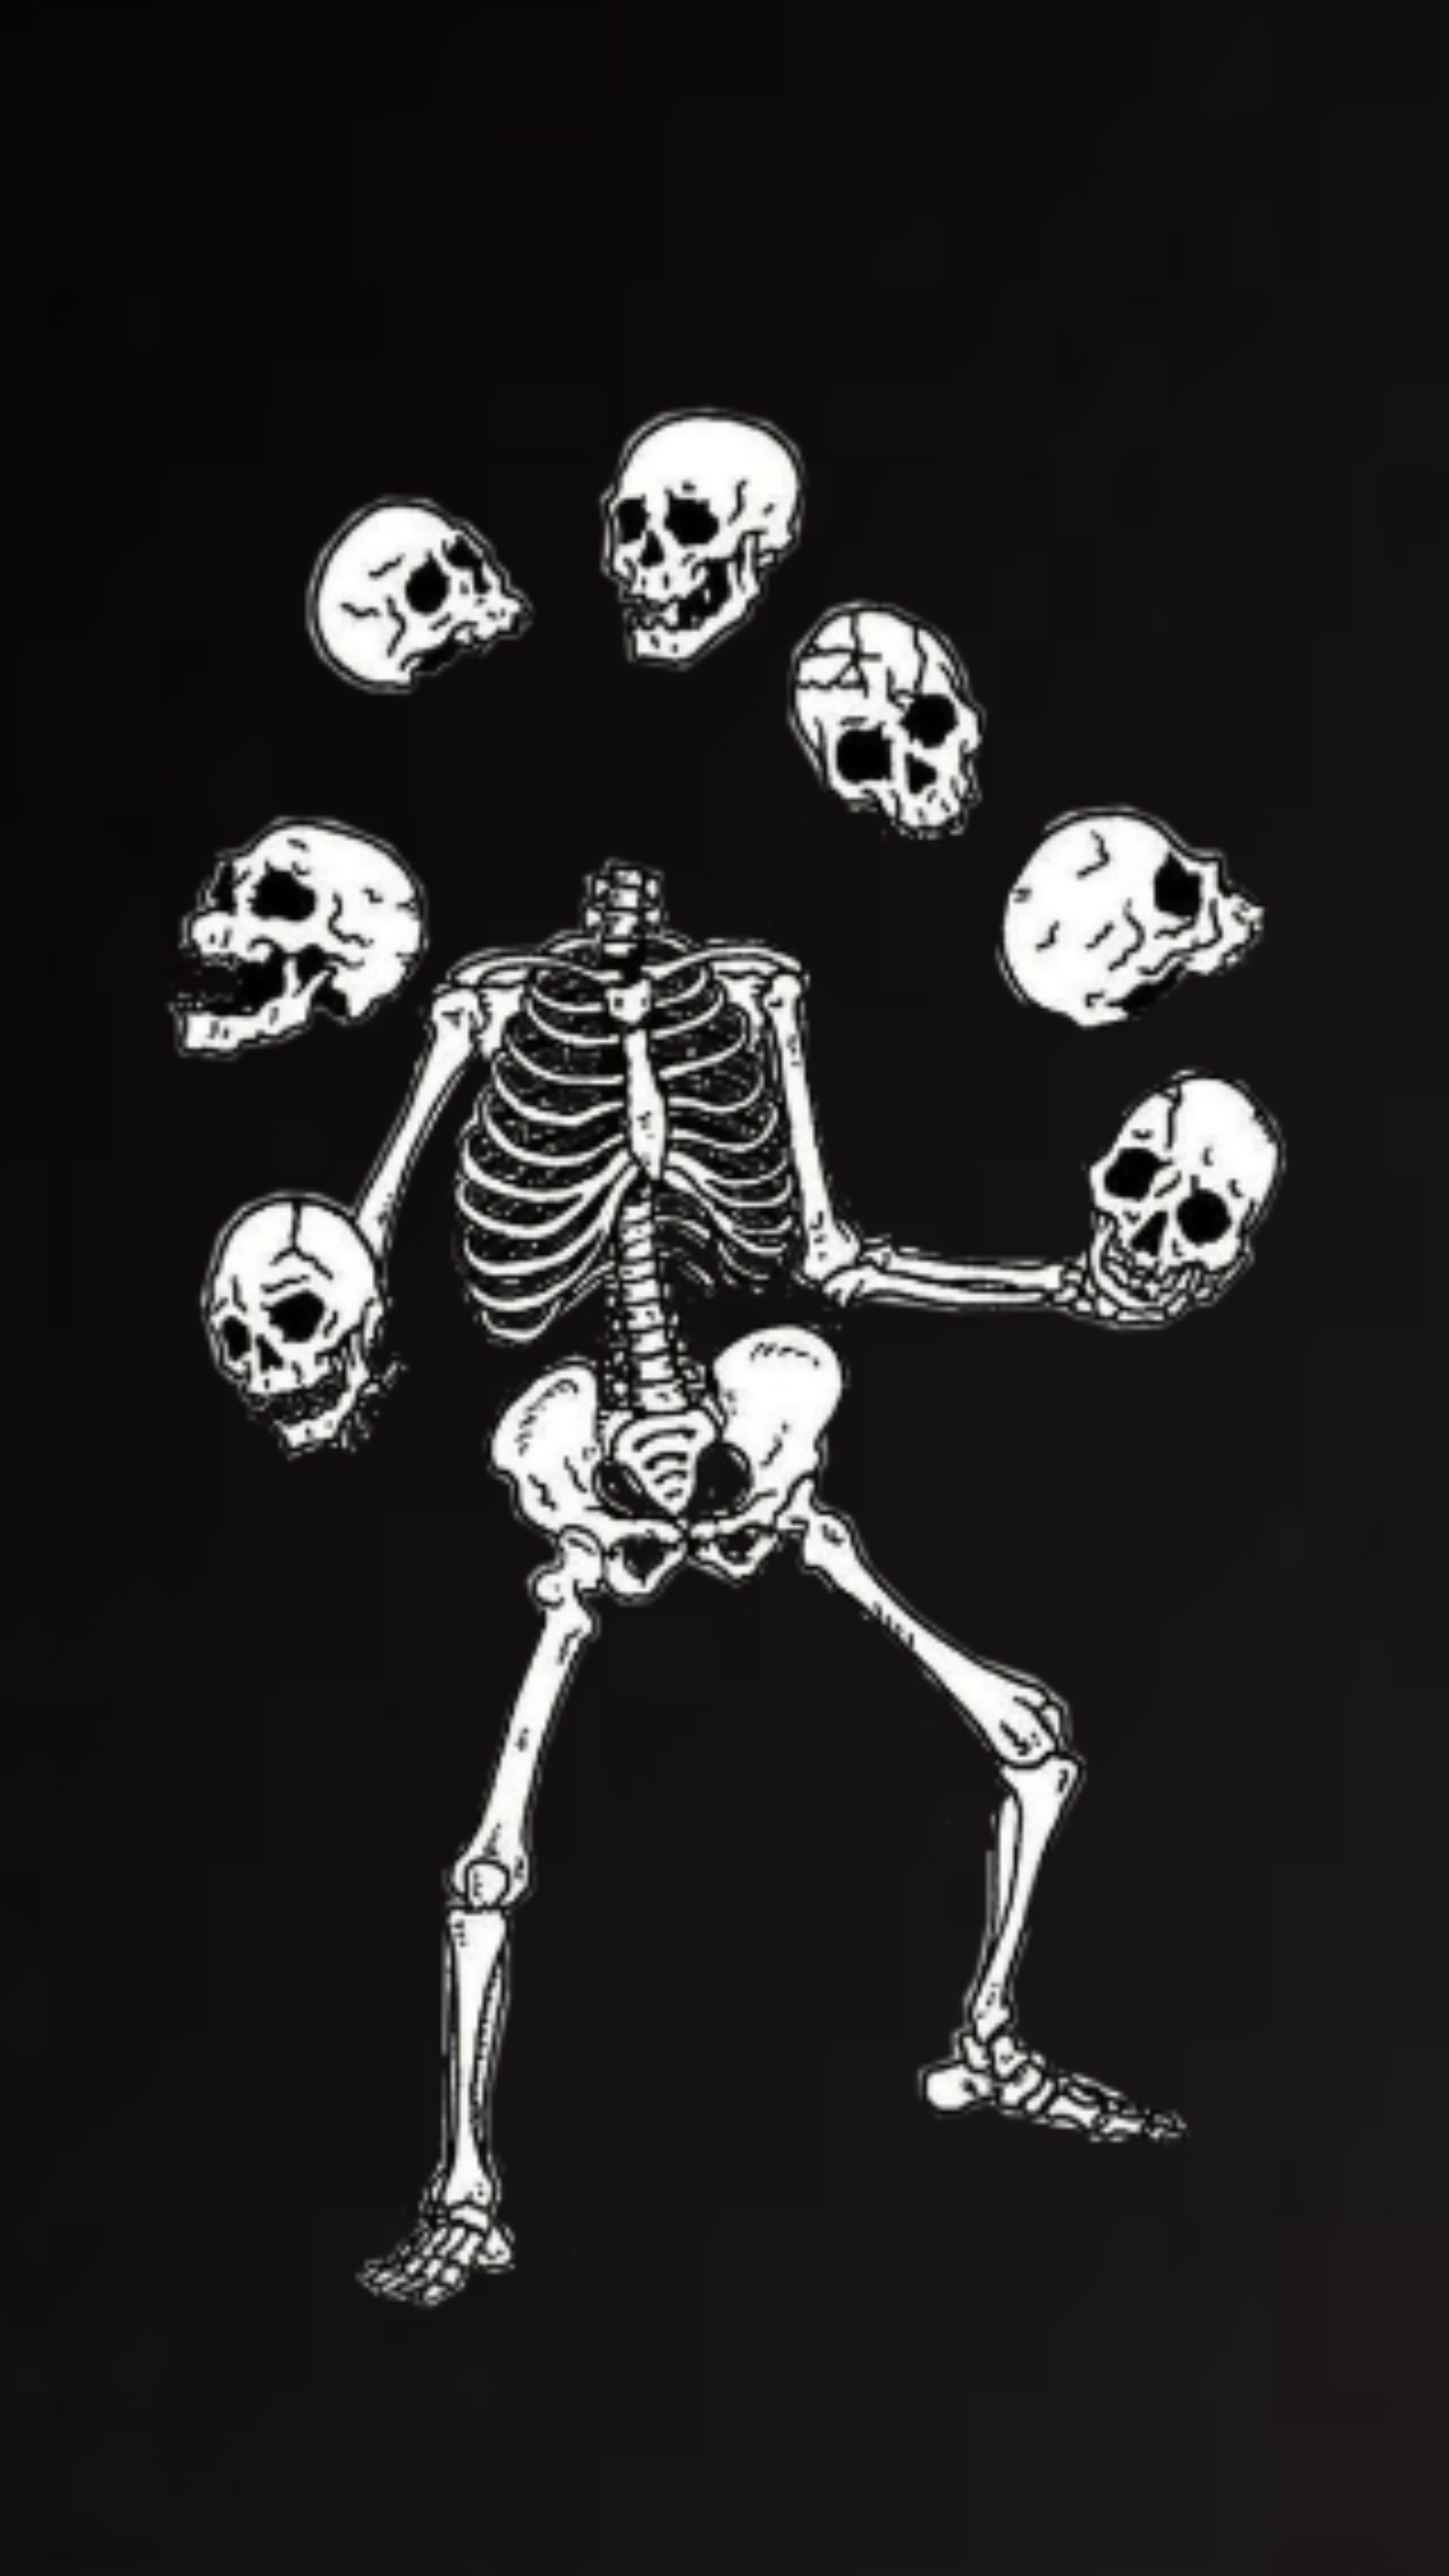 Skeleton Tossing Heads - Wallpaper Cave